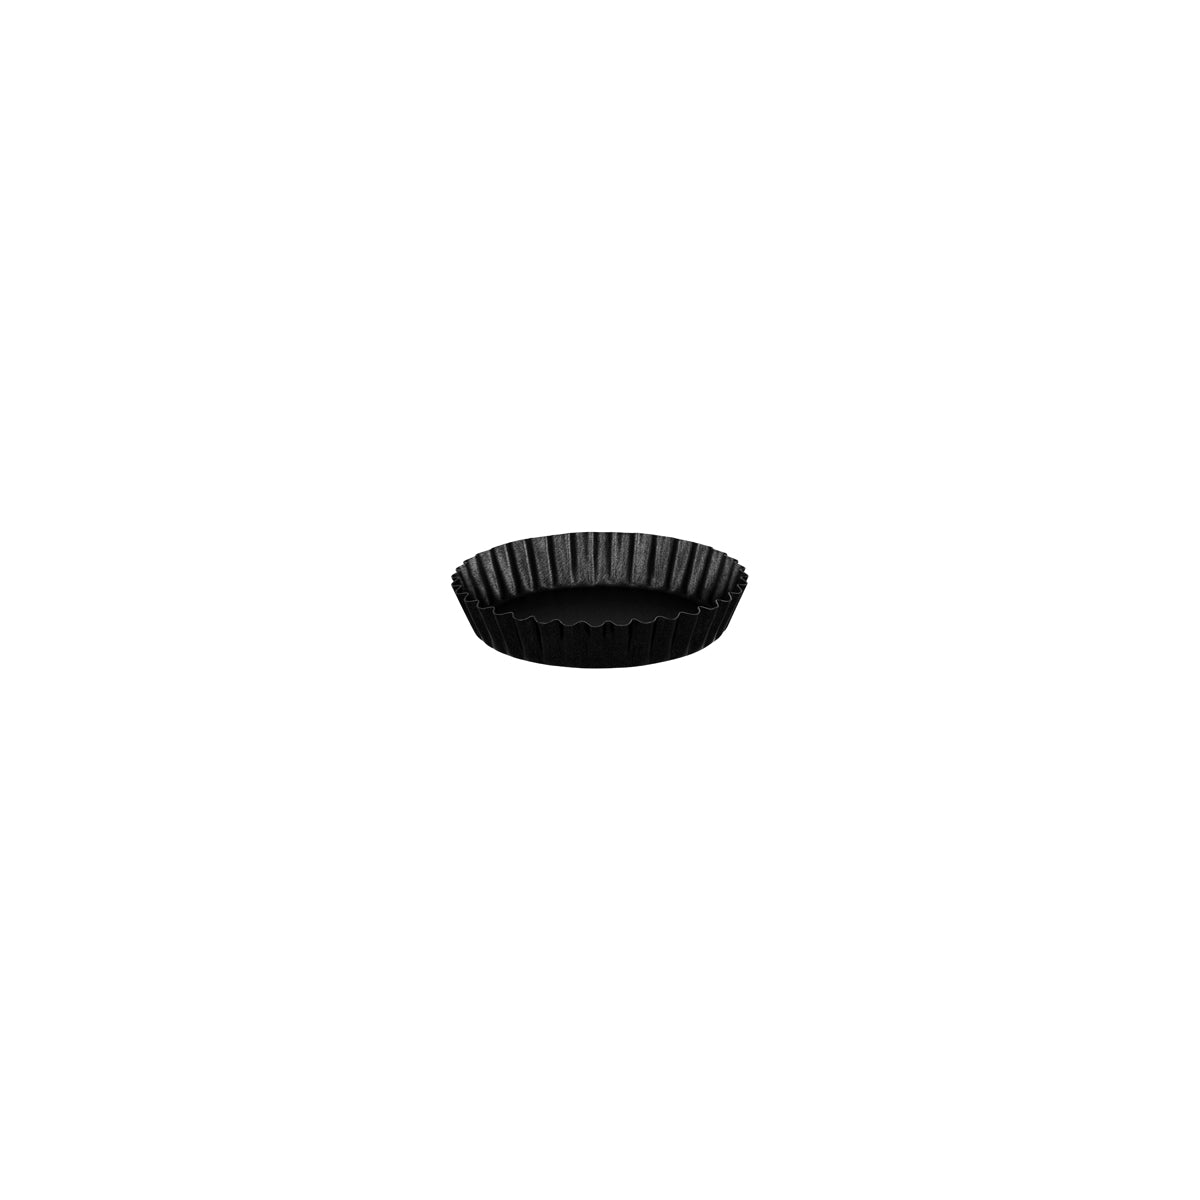 67418 Guery Tart Mould 36 Ribs Round Fluted Non-Stick 105x20mm Tomkin Australia Hospitality Supplies